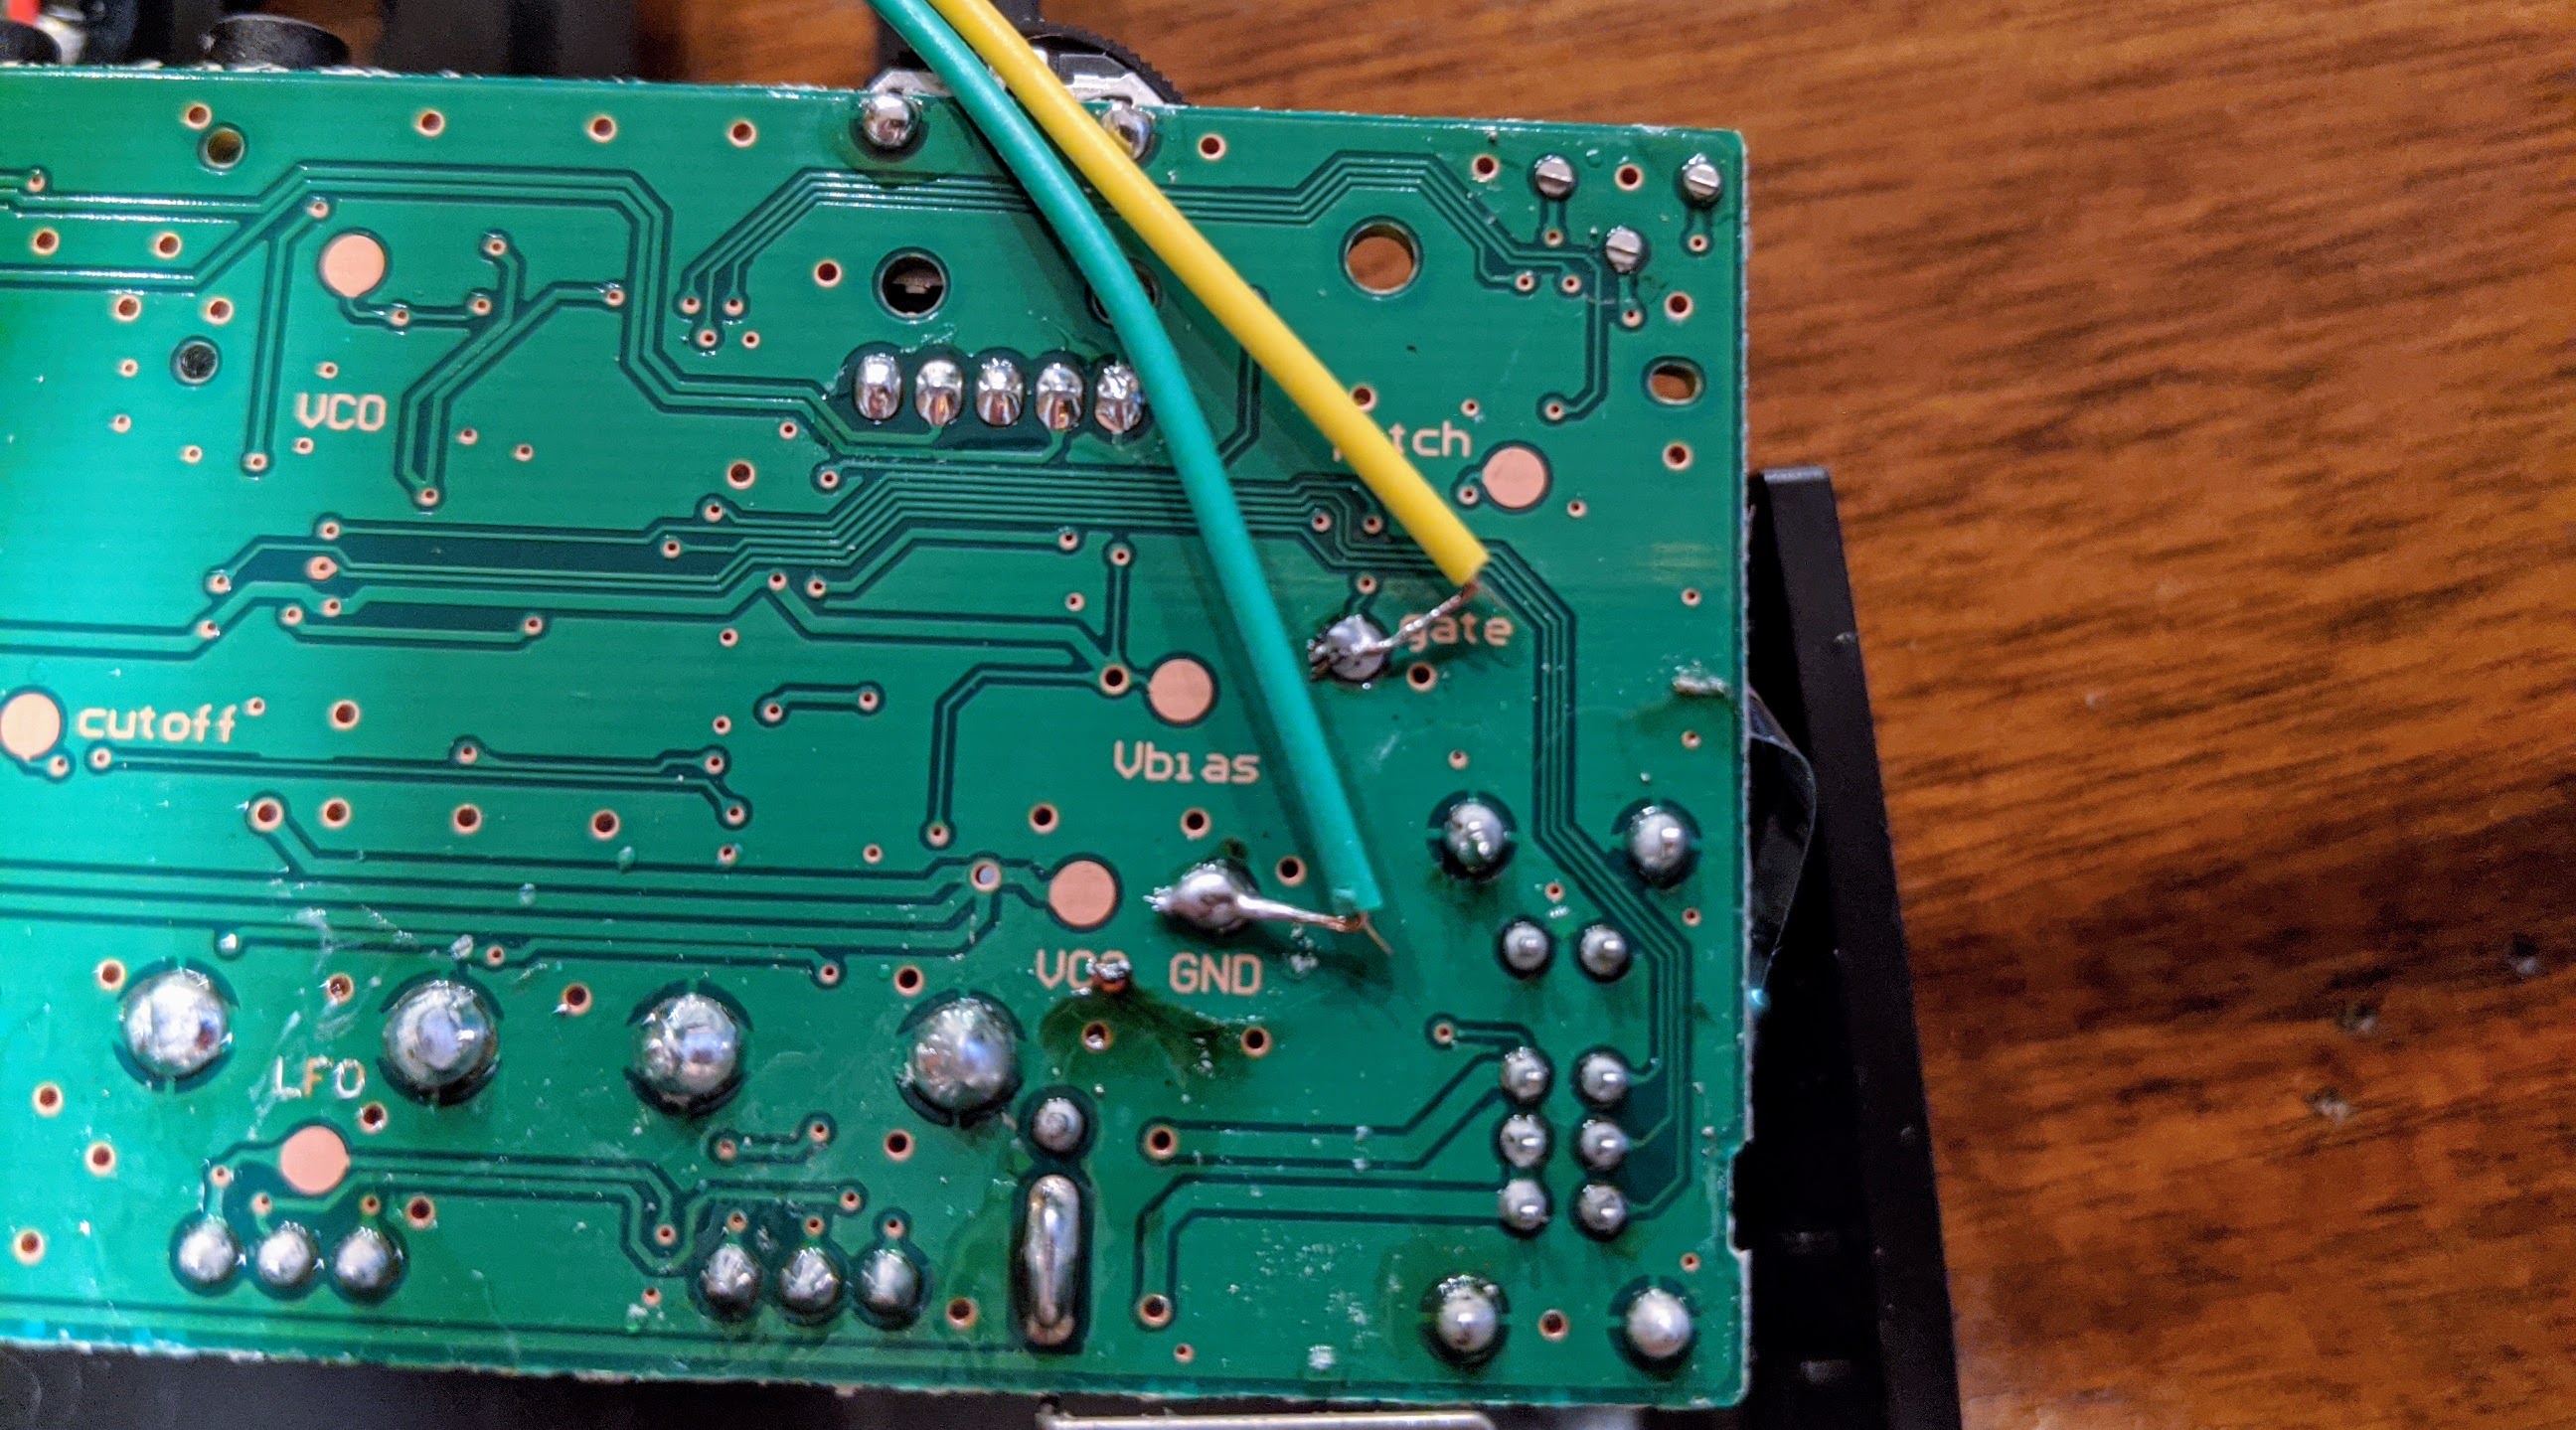 The only two soldering connections you need to make.